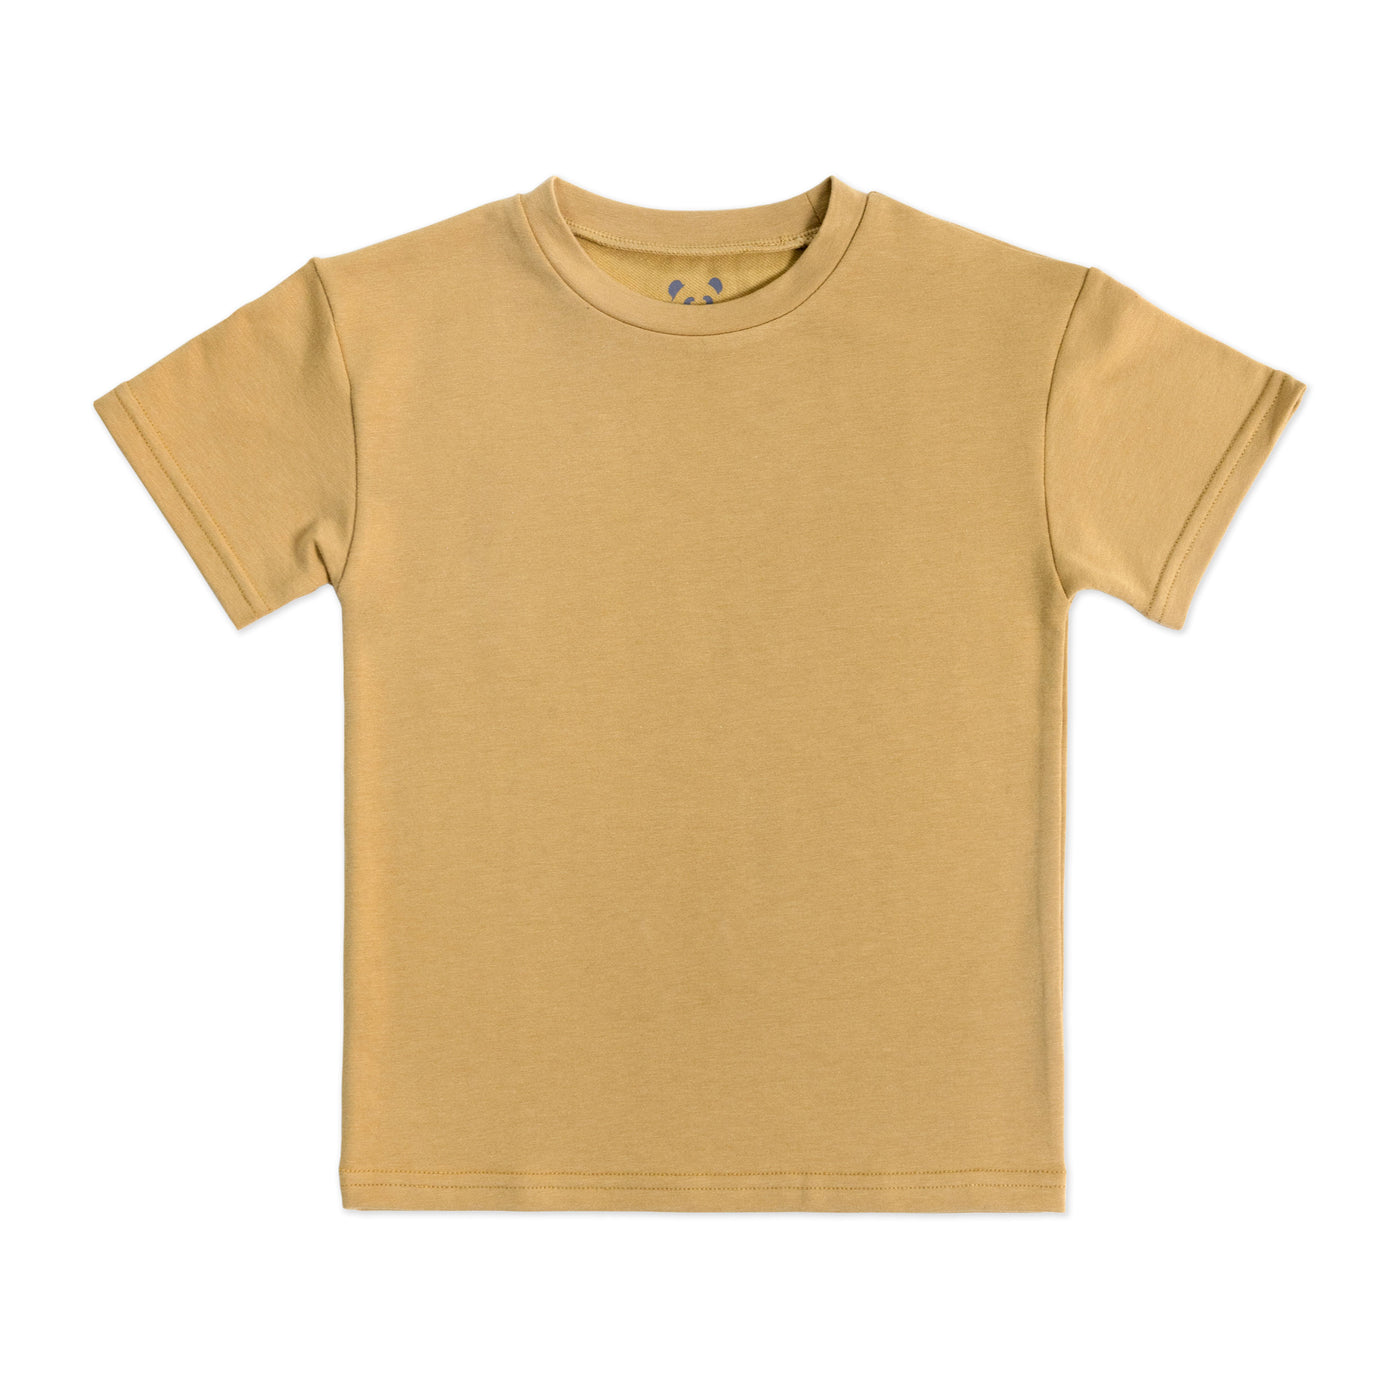 Bamboo Terry Youth T-shirt